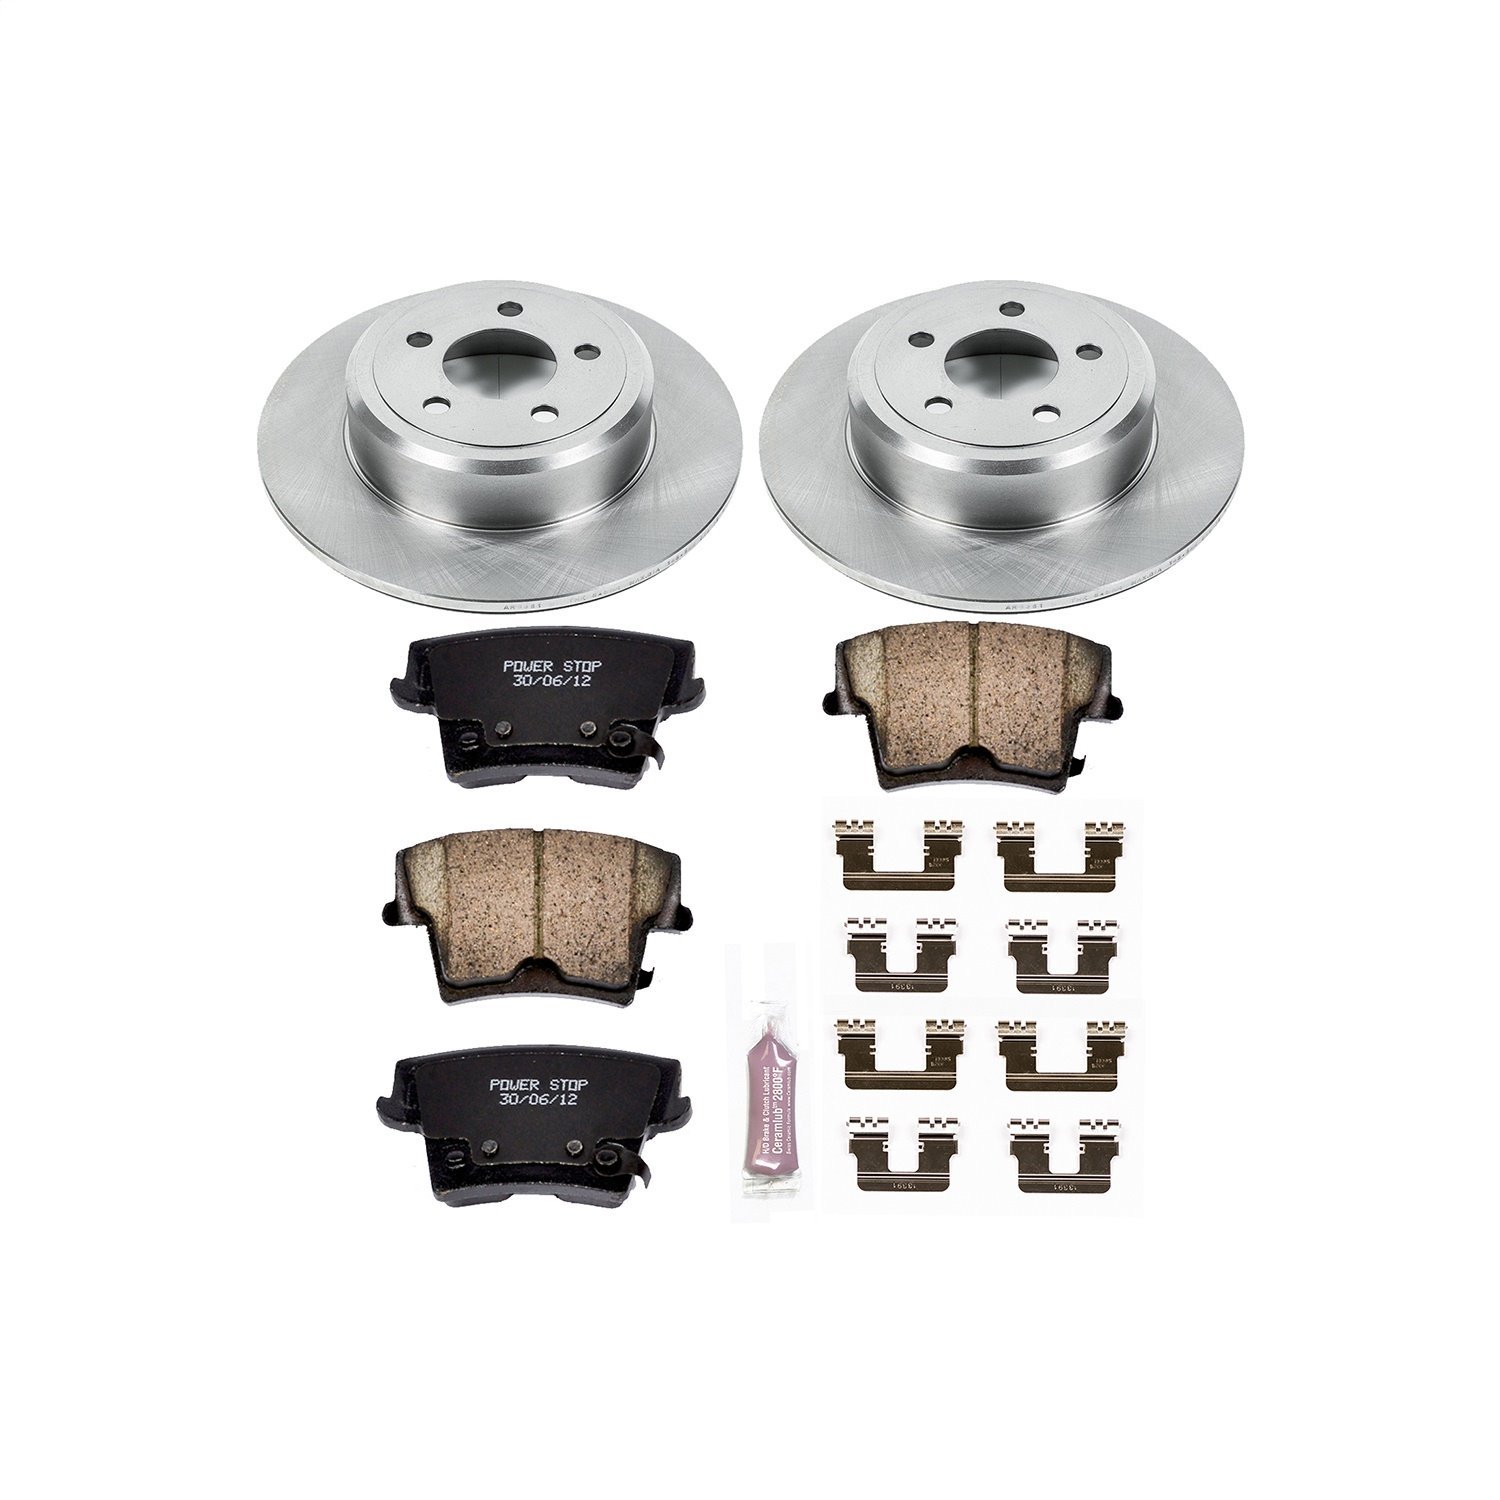 Autospecialty Daily Driver Rear Brake Kit Fits Select Dodge, Chrysler Models